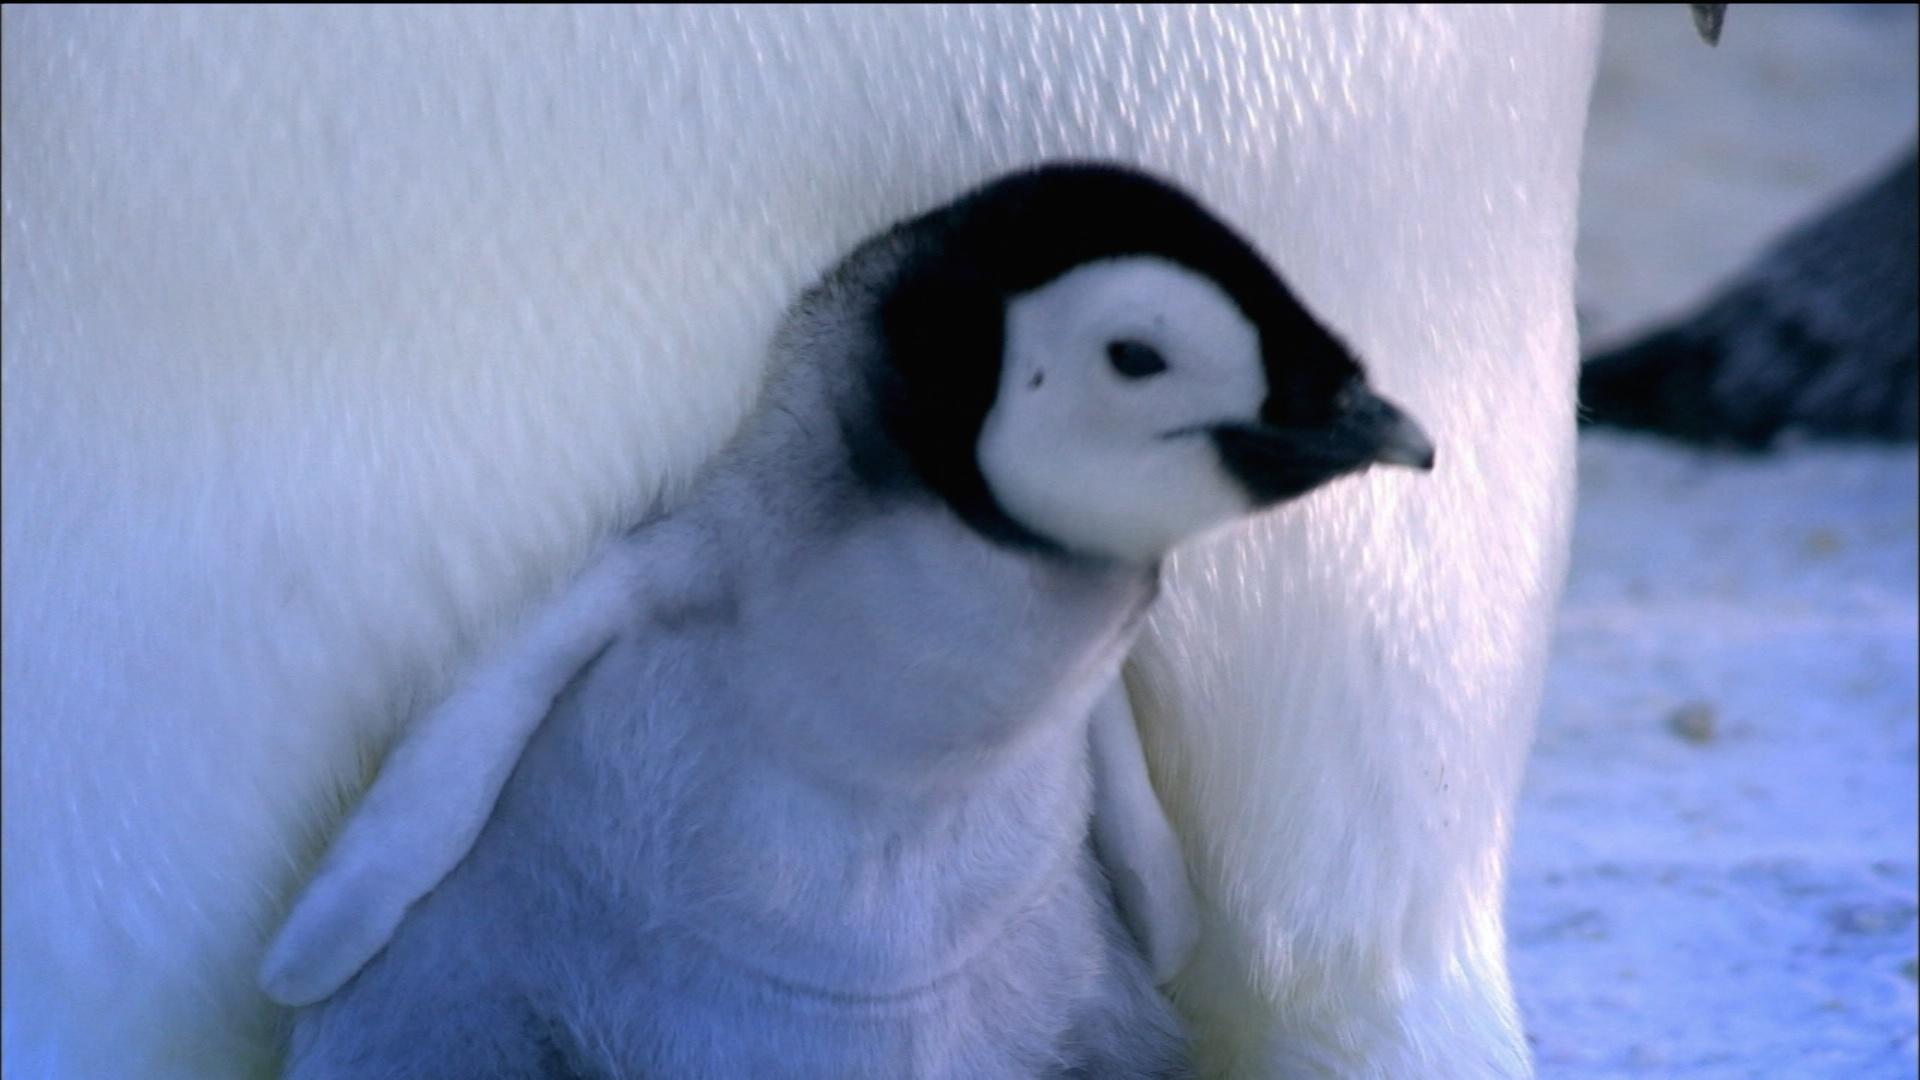 Watch Full Episodes Online of Nature on PBS | Baby Emperor Penguin Emerges from Shell